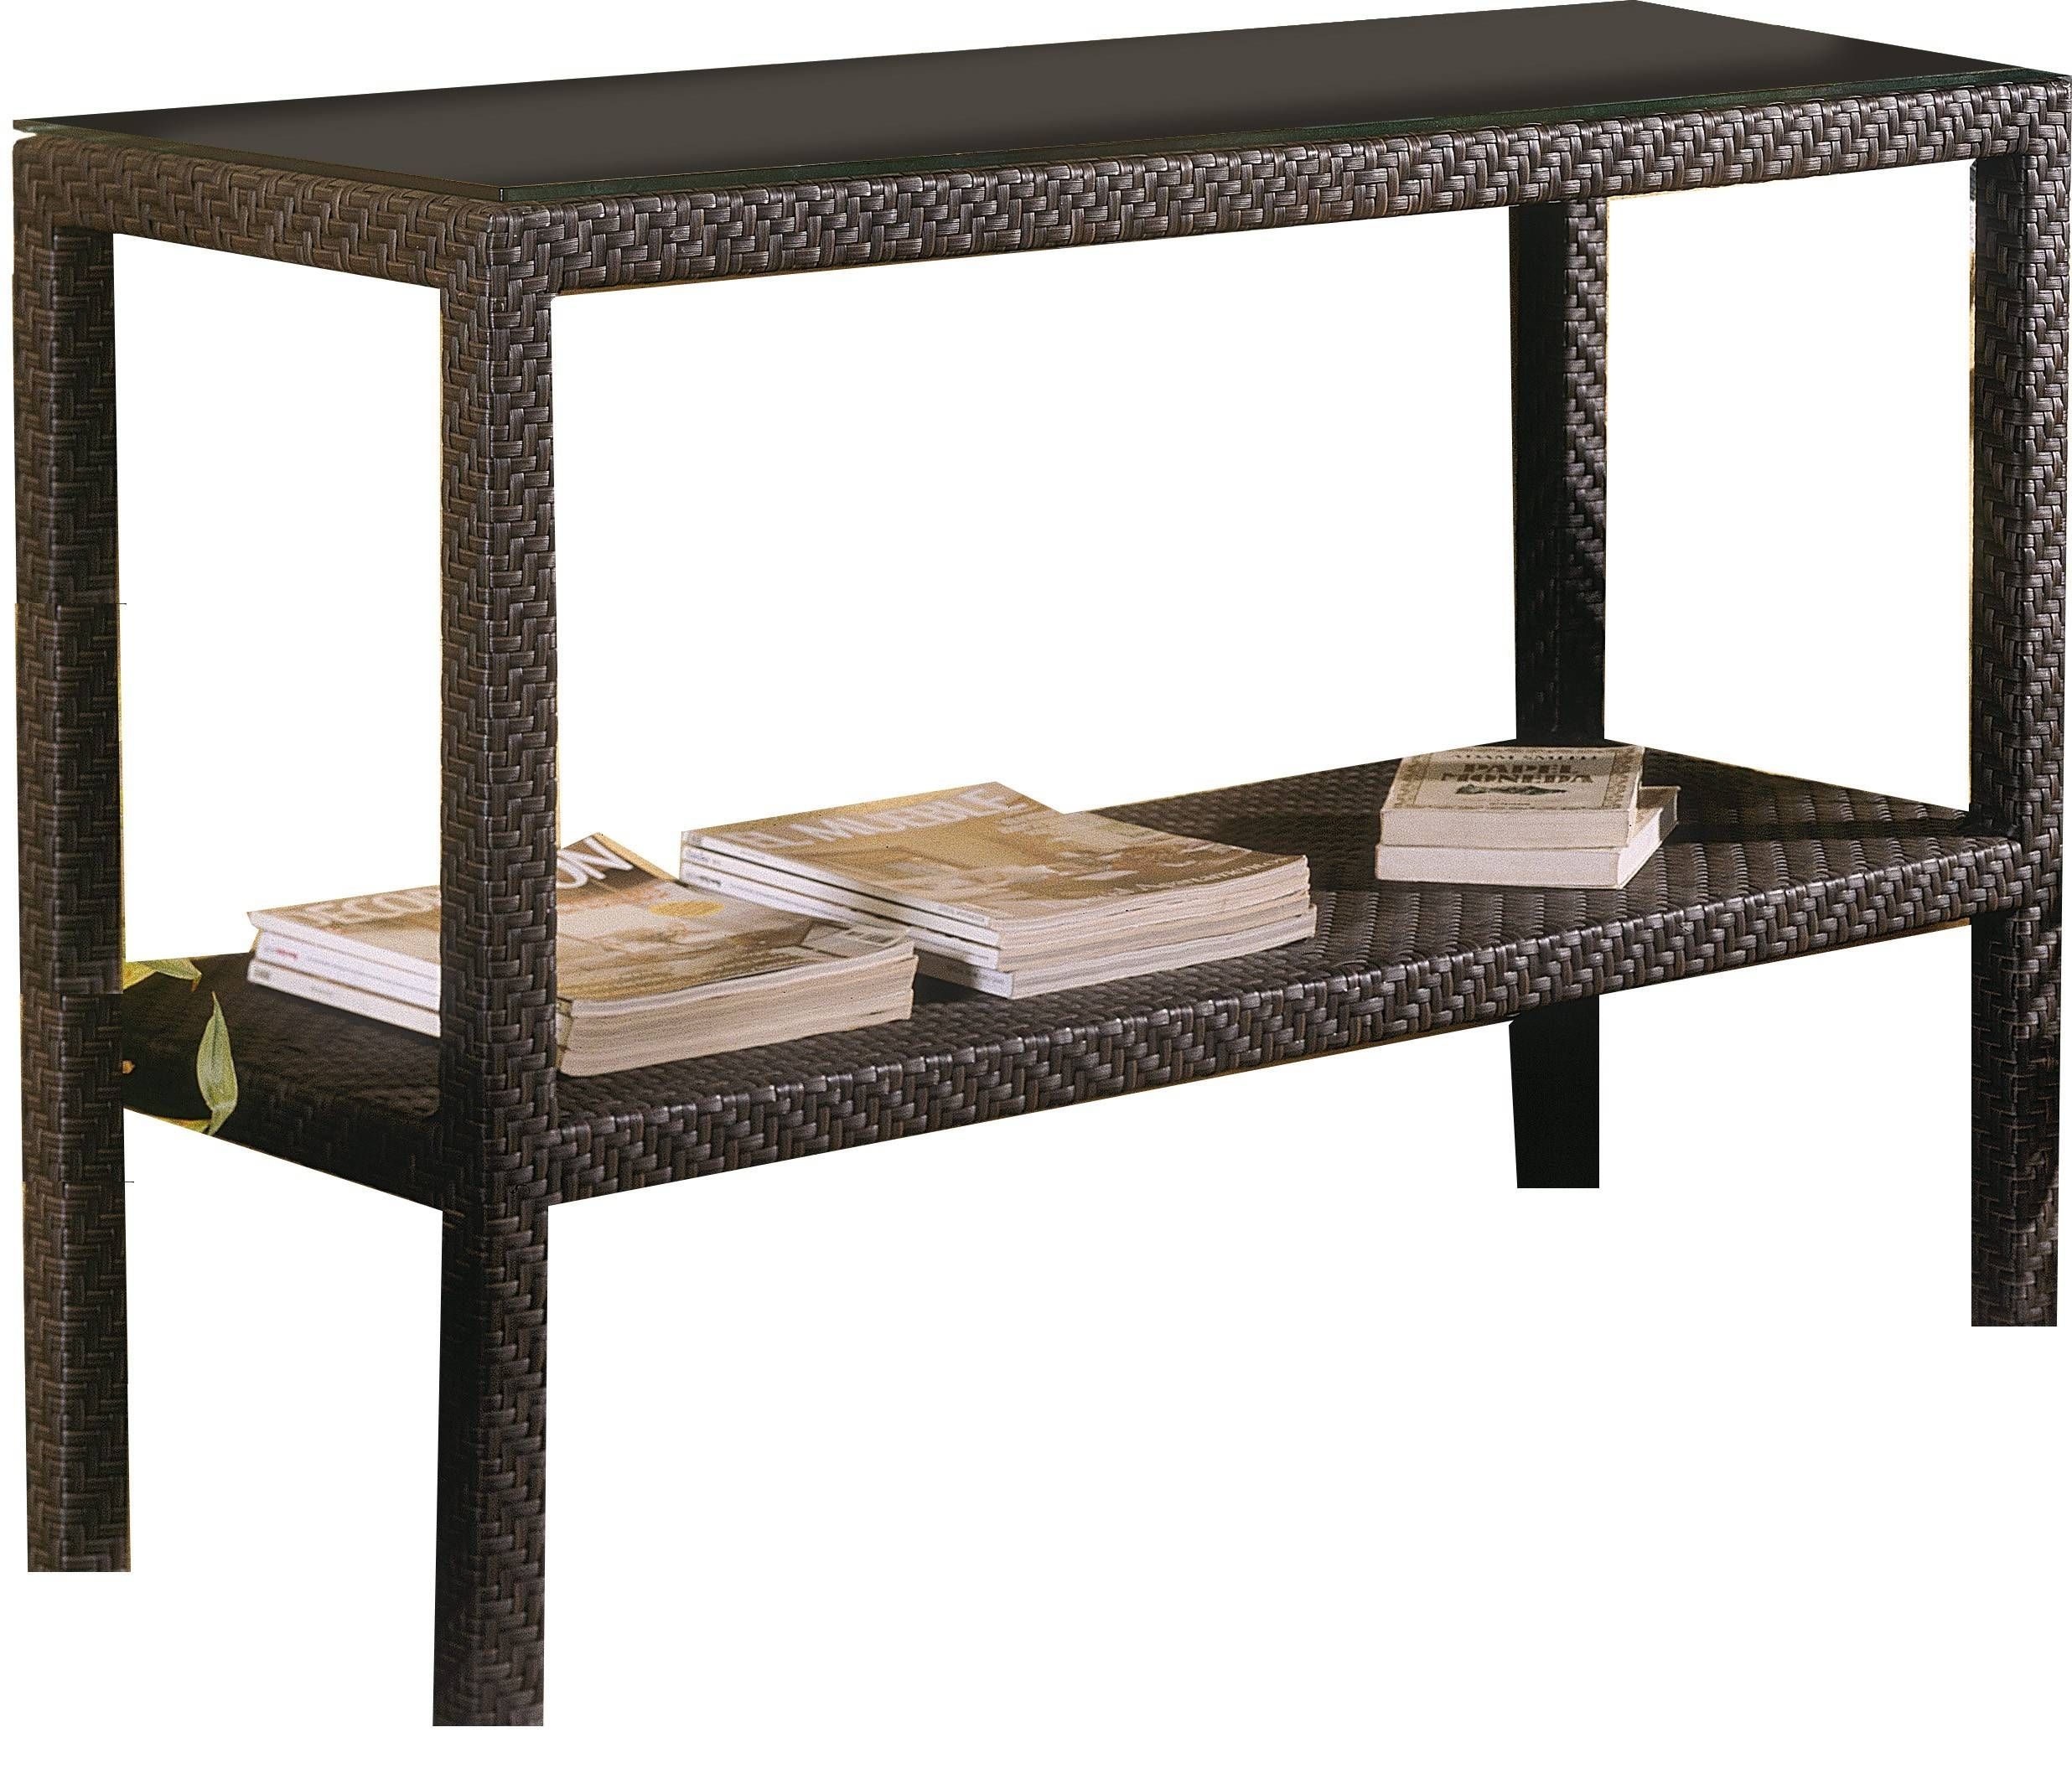 Patio Sofa Table – Gallery Image Syrinx Within Patio Sofa Tables (View 3 of 30)